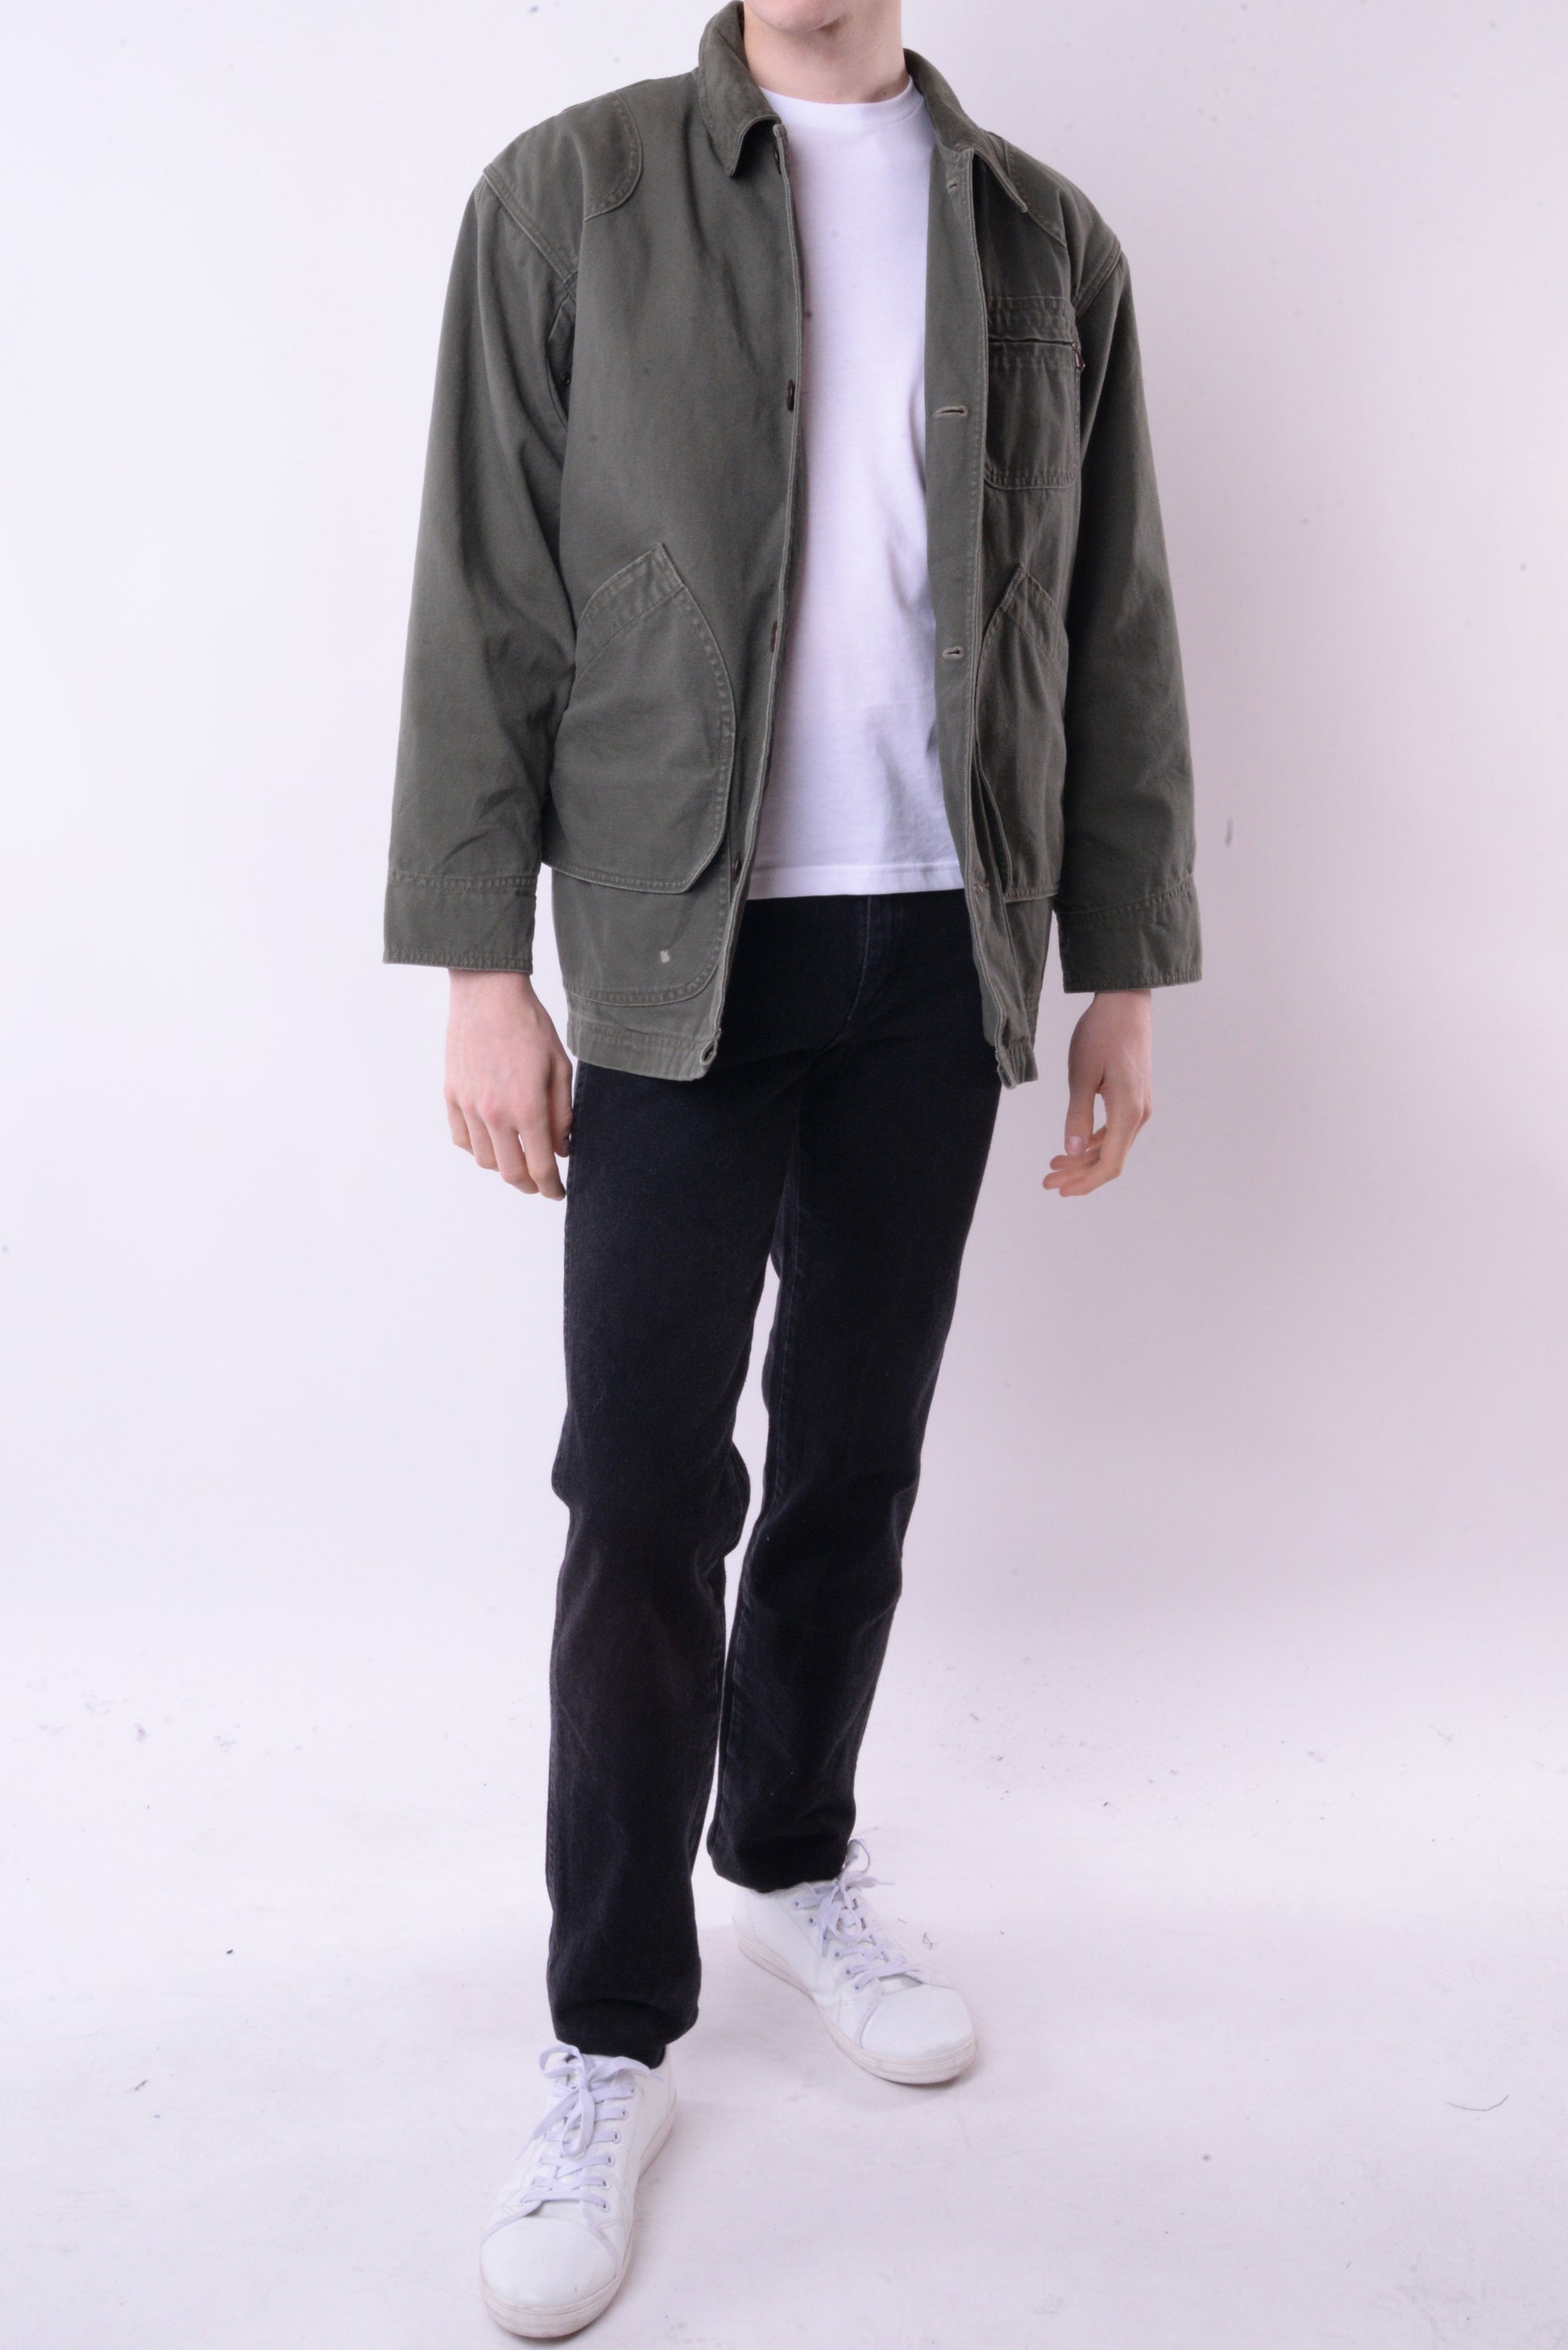 Army Green Work Jacket Free Shipping - The Vintage Twin